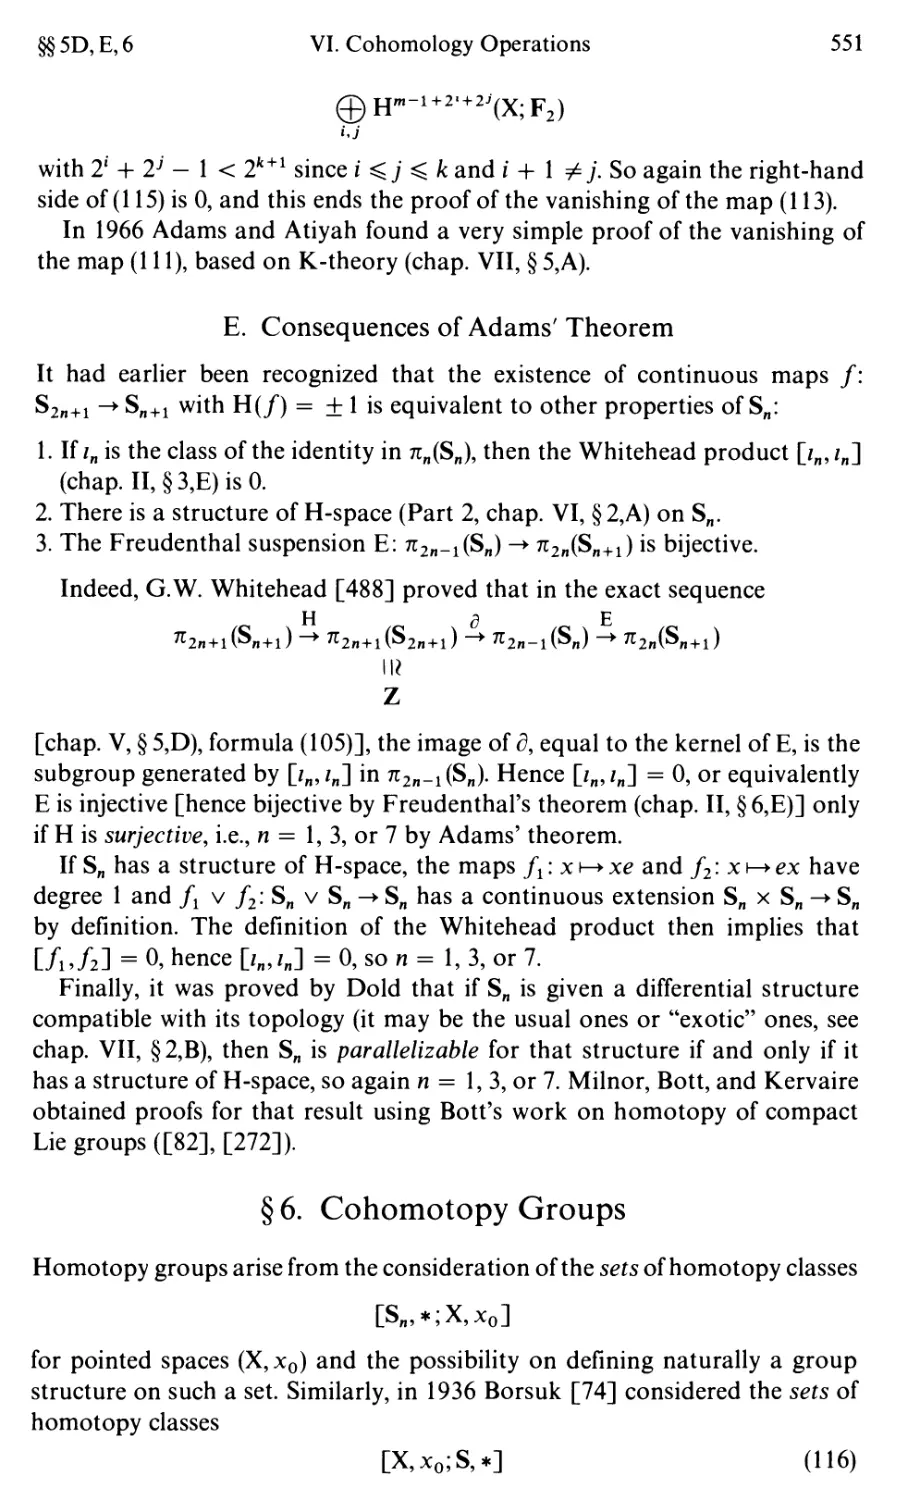 E. Consequences of Adams' Theorem
§6. Cohomotopy Groups